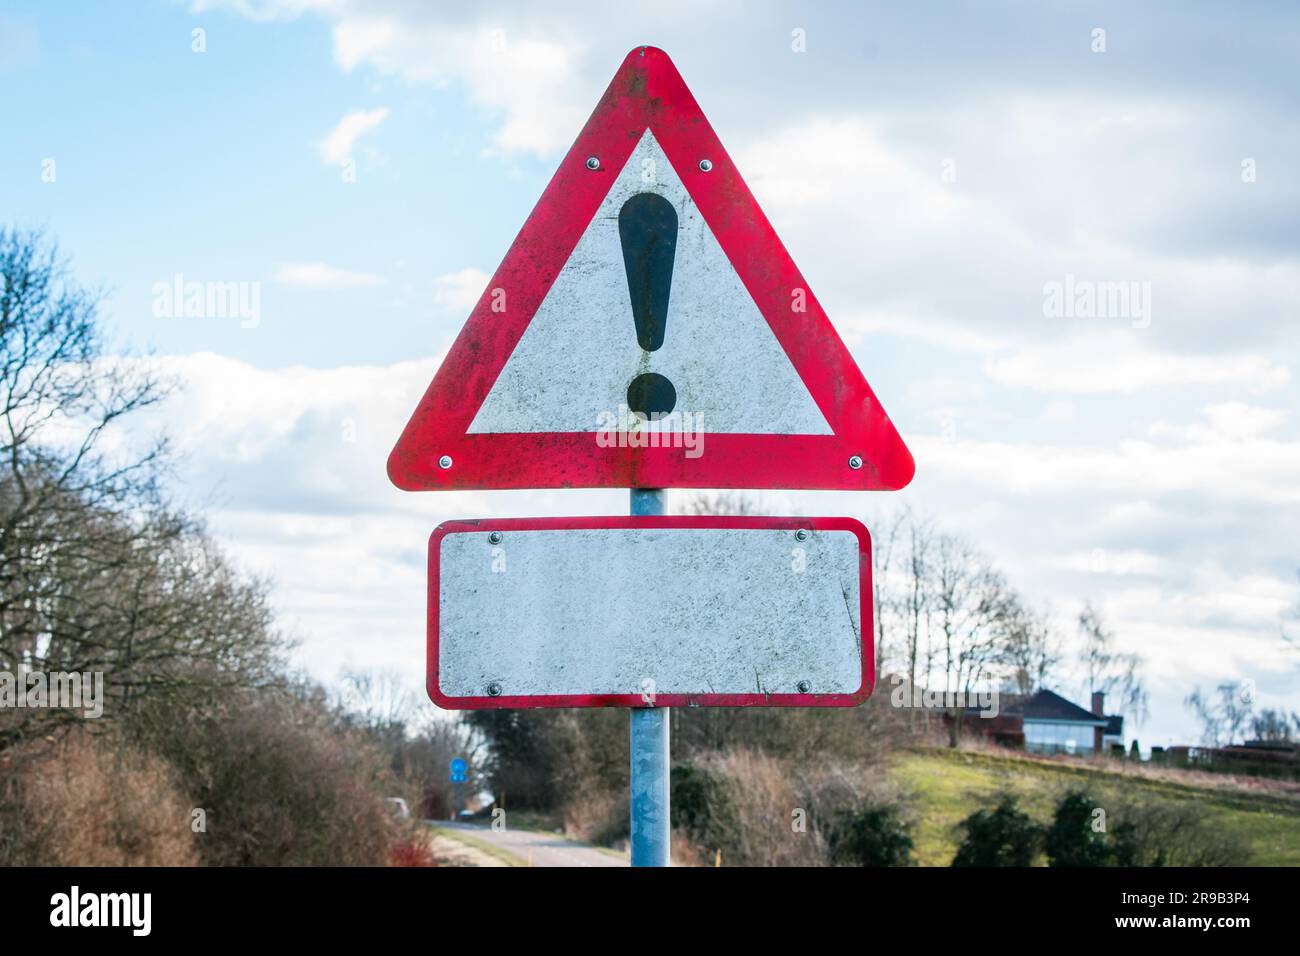 Exclamation traffic sign in cloudy weather Stock Photo